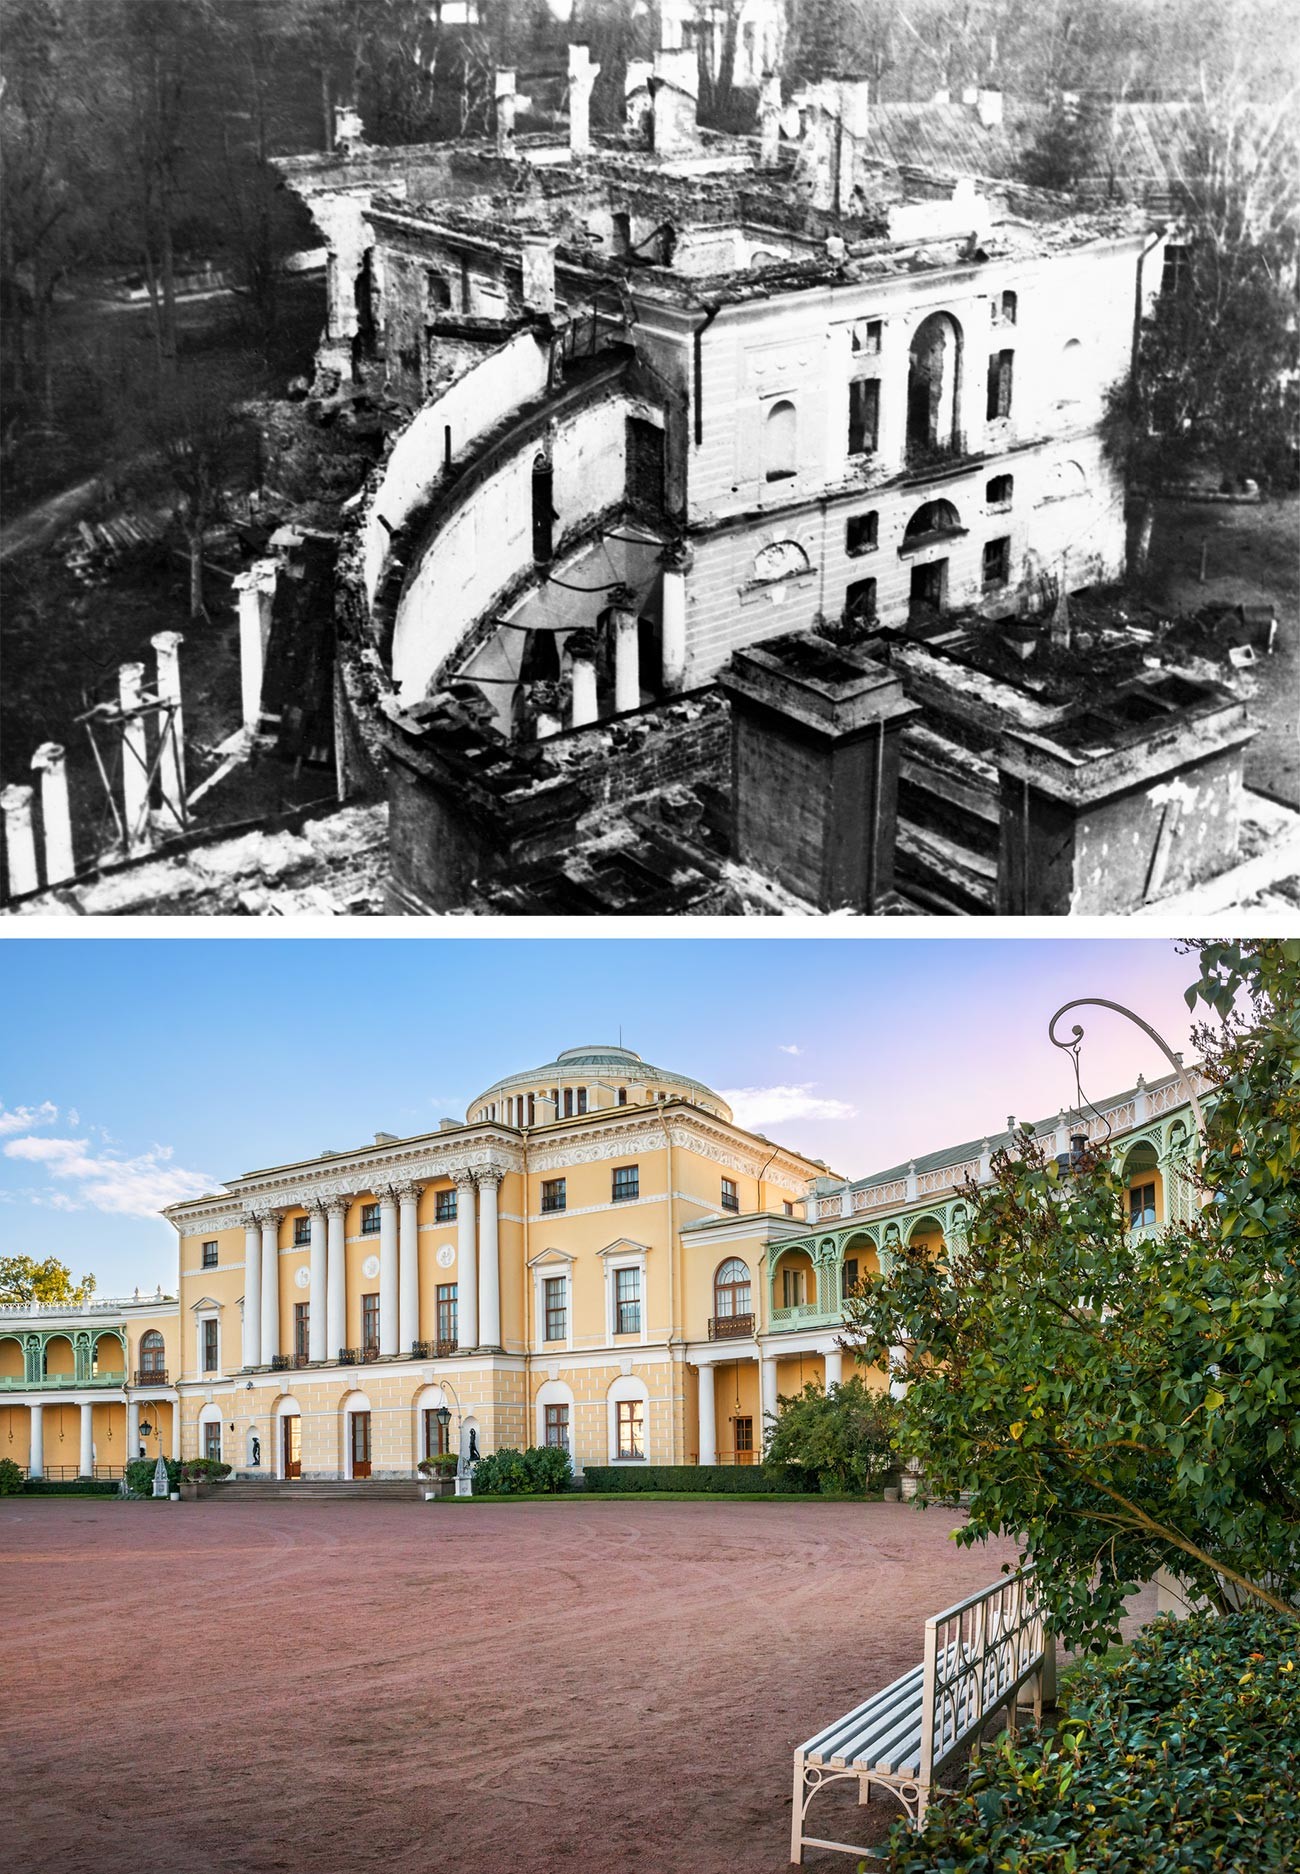 The Pavlovsk Palace in 1944 and now